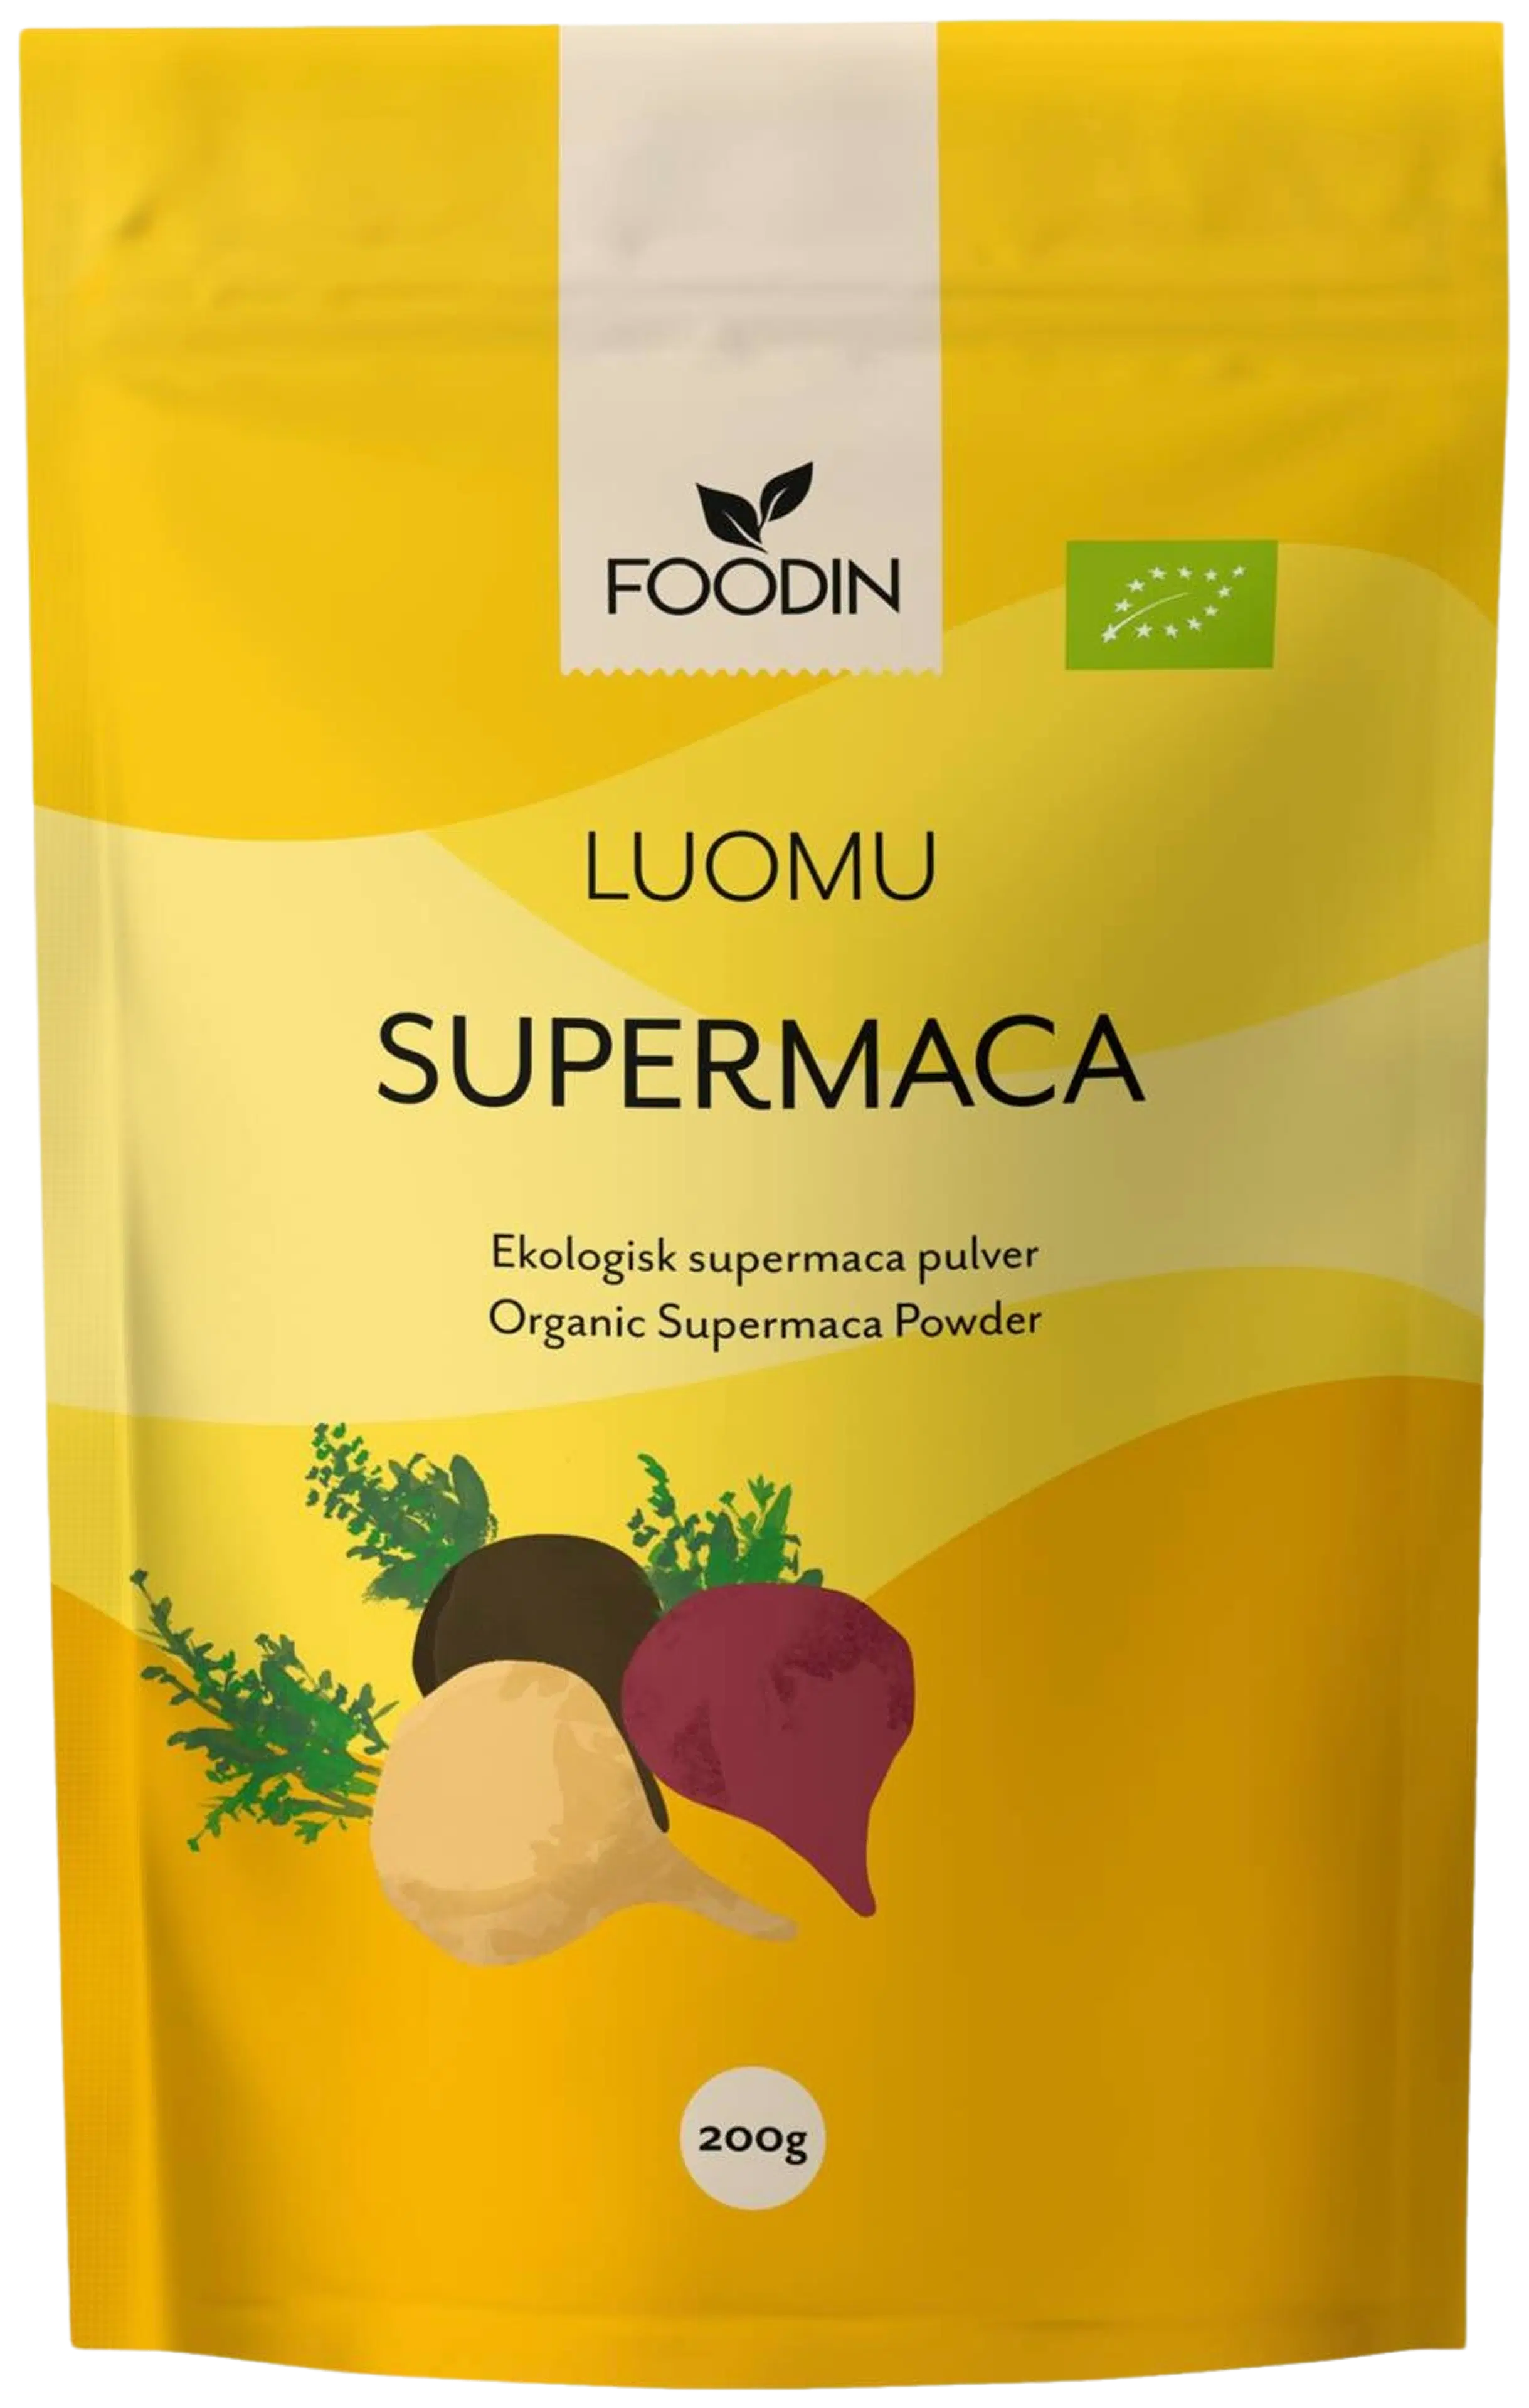 Foodin Supermaca, luomu 200g